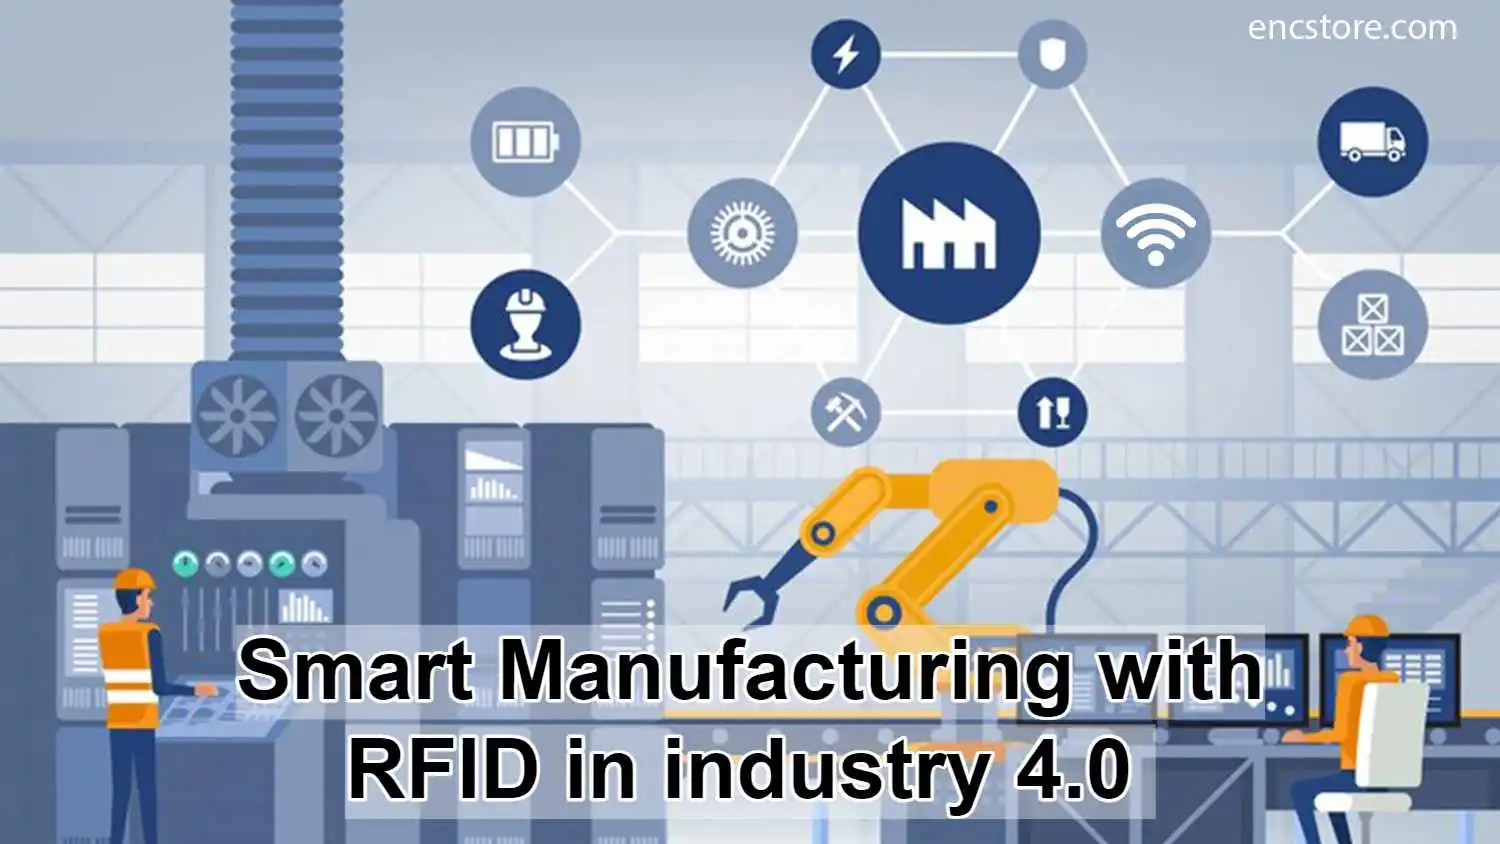 Smart Manufacturing with RFID in industry 4.0